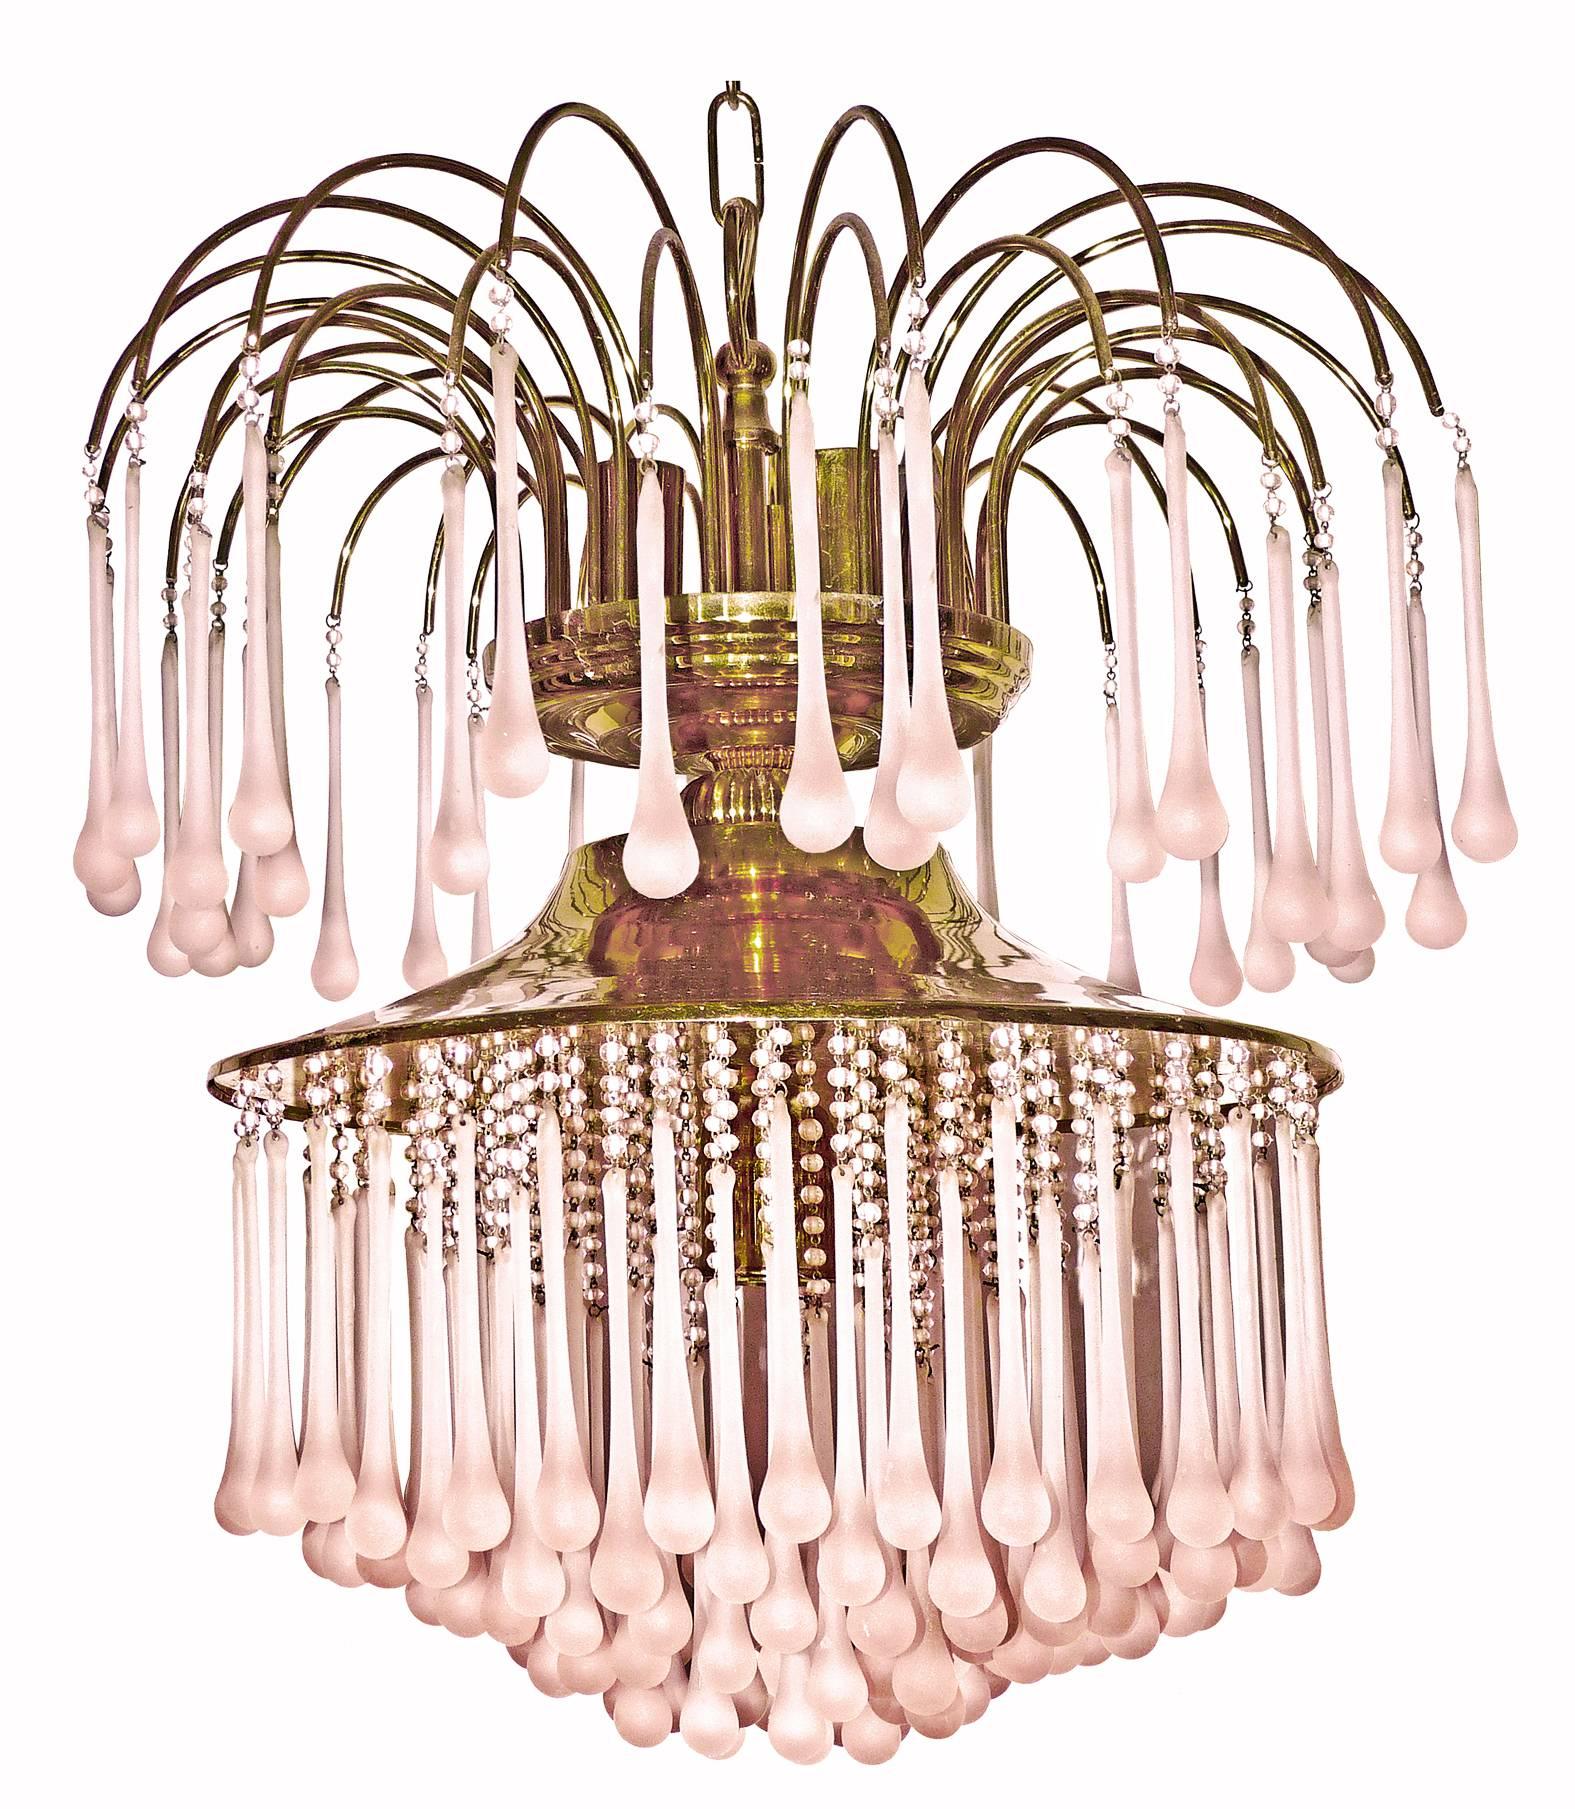 Rare gorgeous midcentury Italian Murano Venini pink fogged crystal teardrop waterfall wedding cake chandelier
24-karat gold plated high quality chandelier
Measures:
Diameter: 40 cm ( 15 in)
Height: 100 cm (75 cm + 25 cm/chain) 40 in(30 in + 10